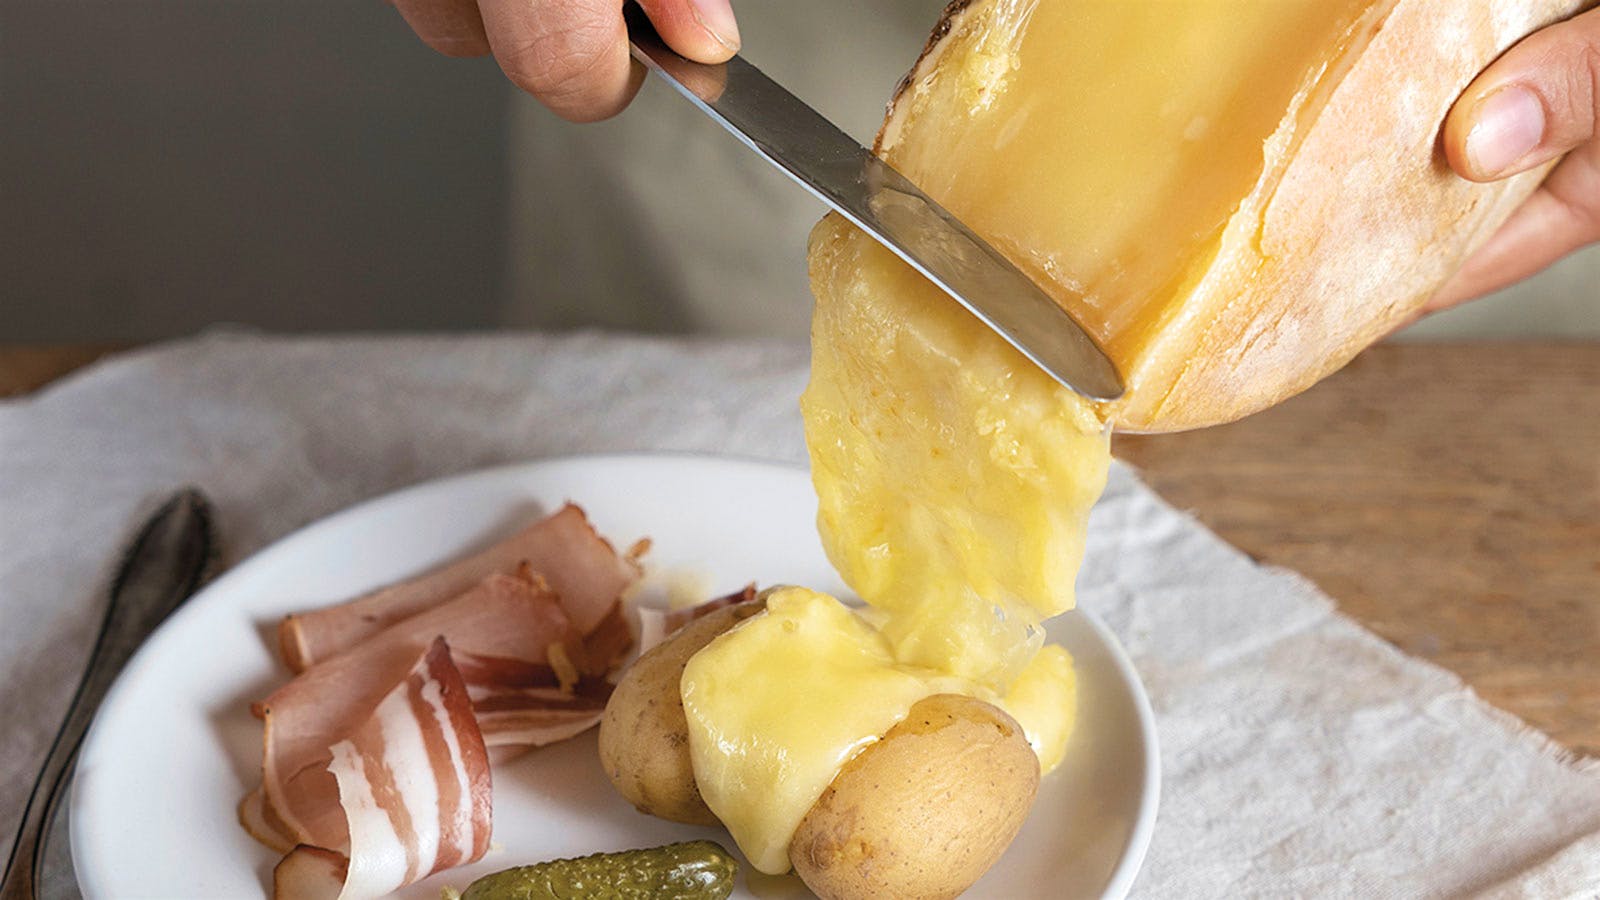 How to Host a Raclette Party